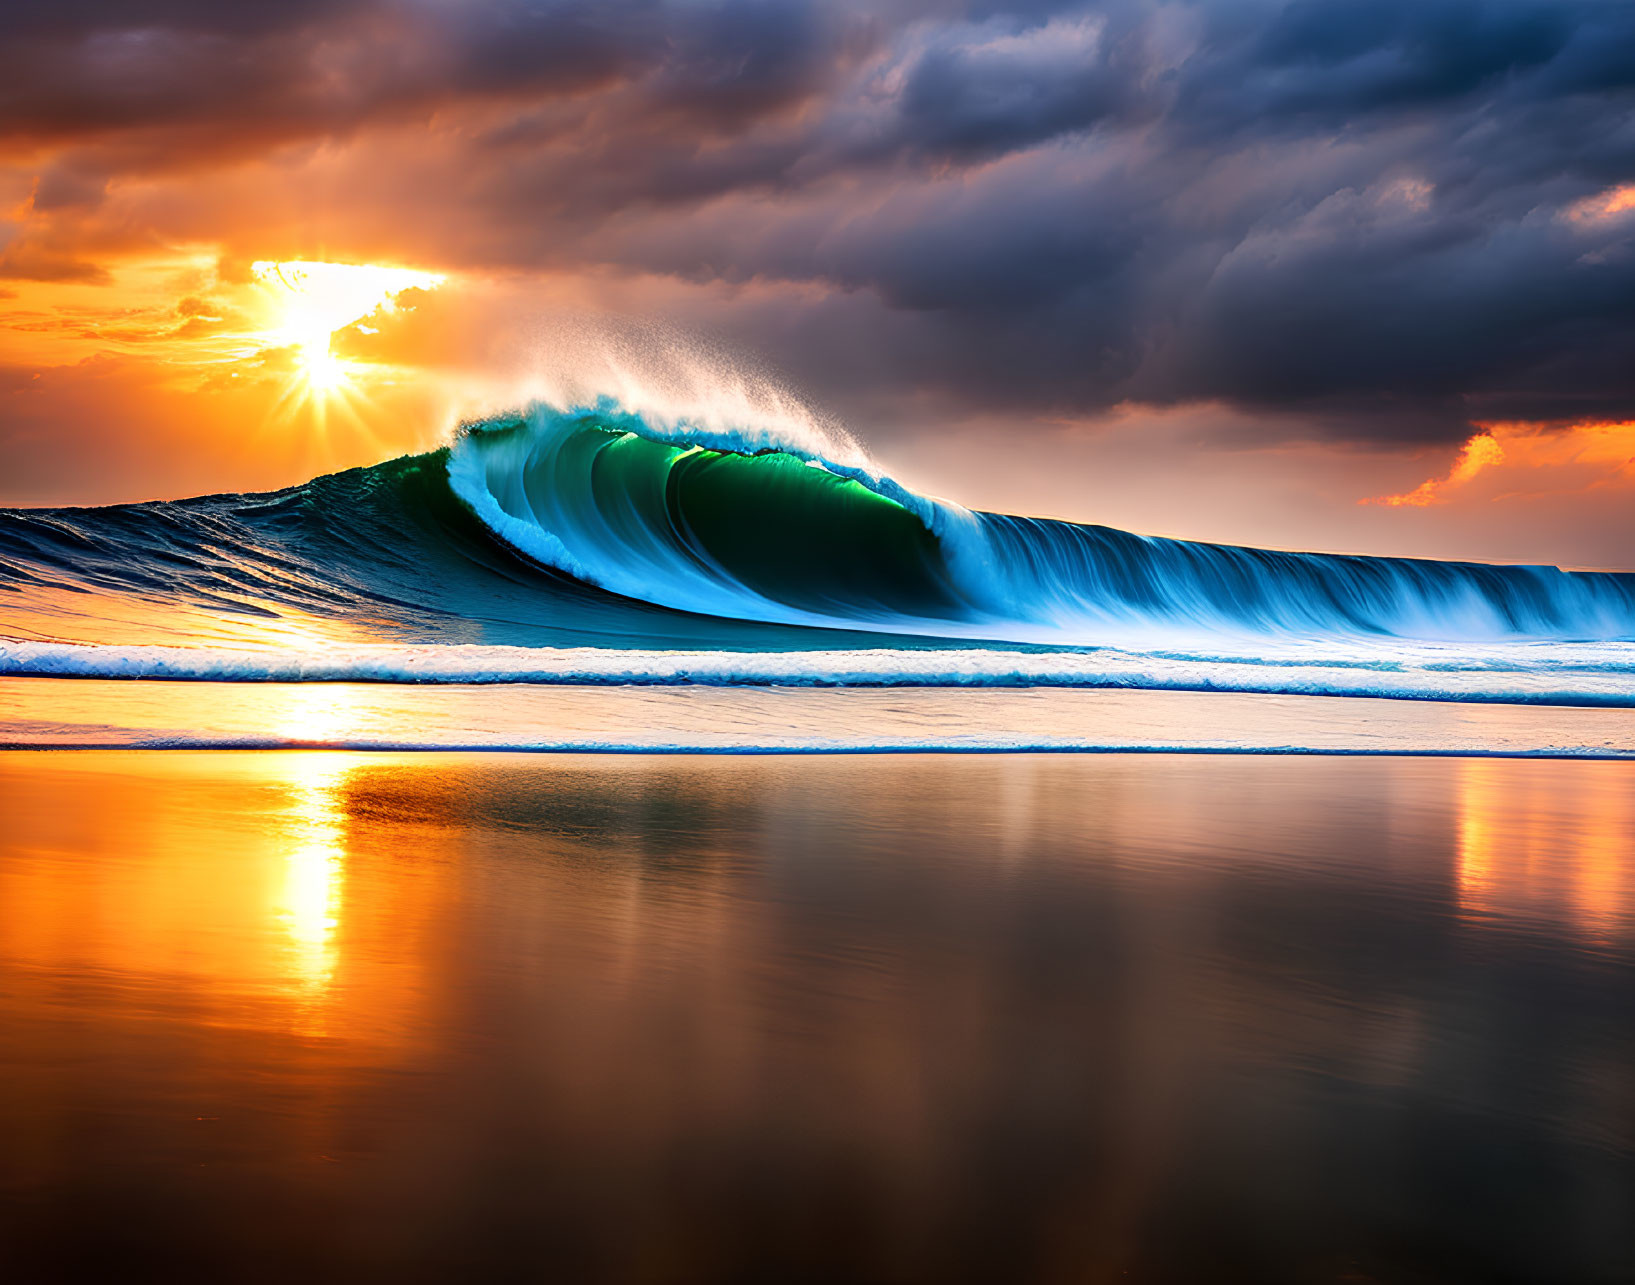 Dramatic sunset with majestic wave and golden light on wet beach